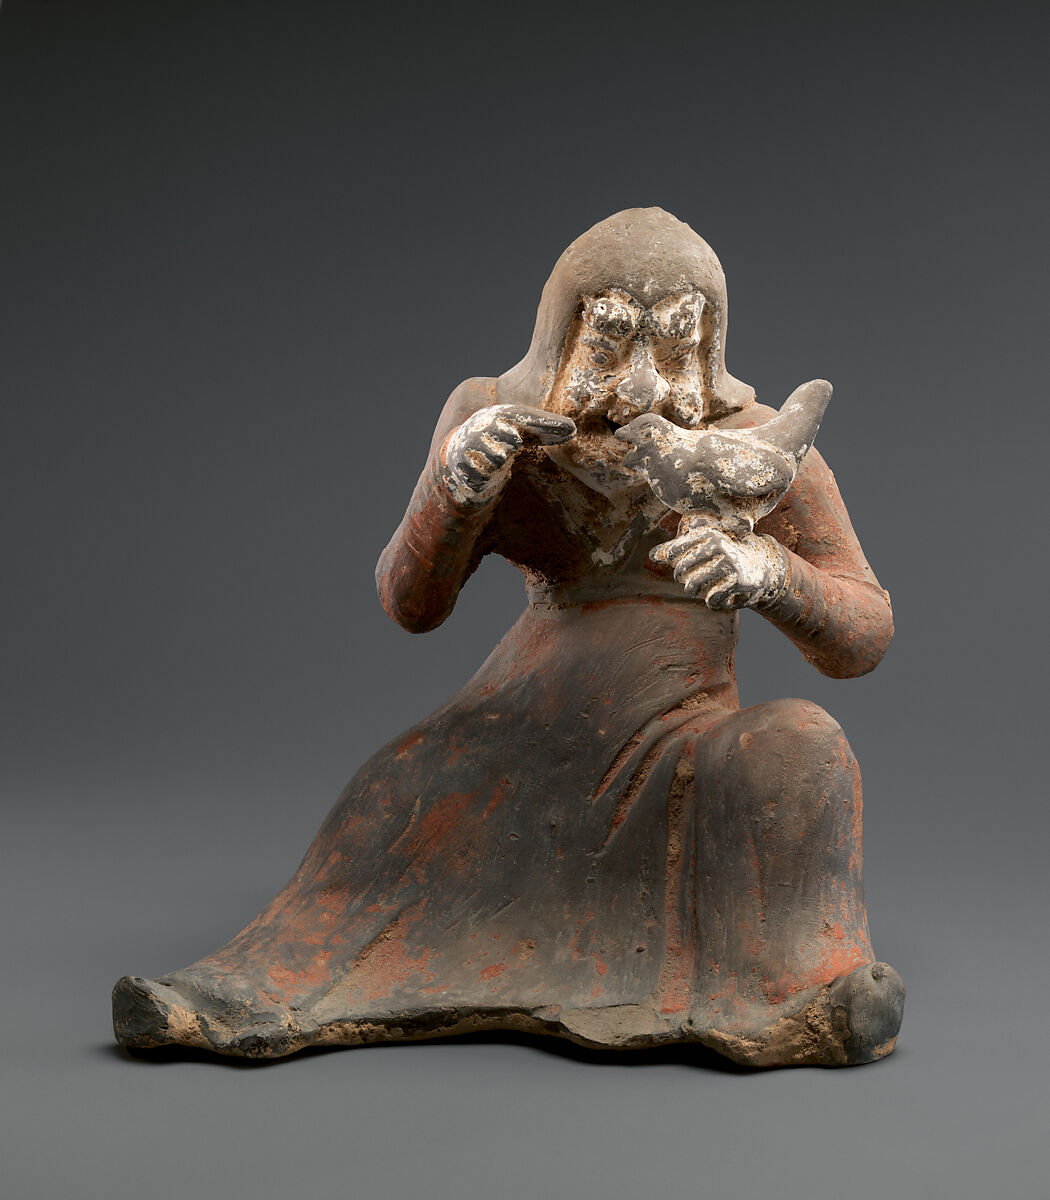 Seated Falconer, Earthenware with red and white pigments, China 